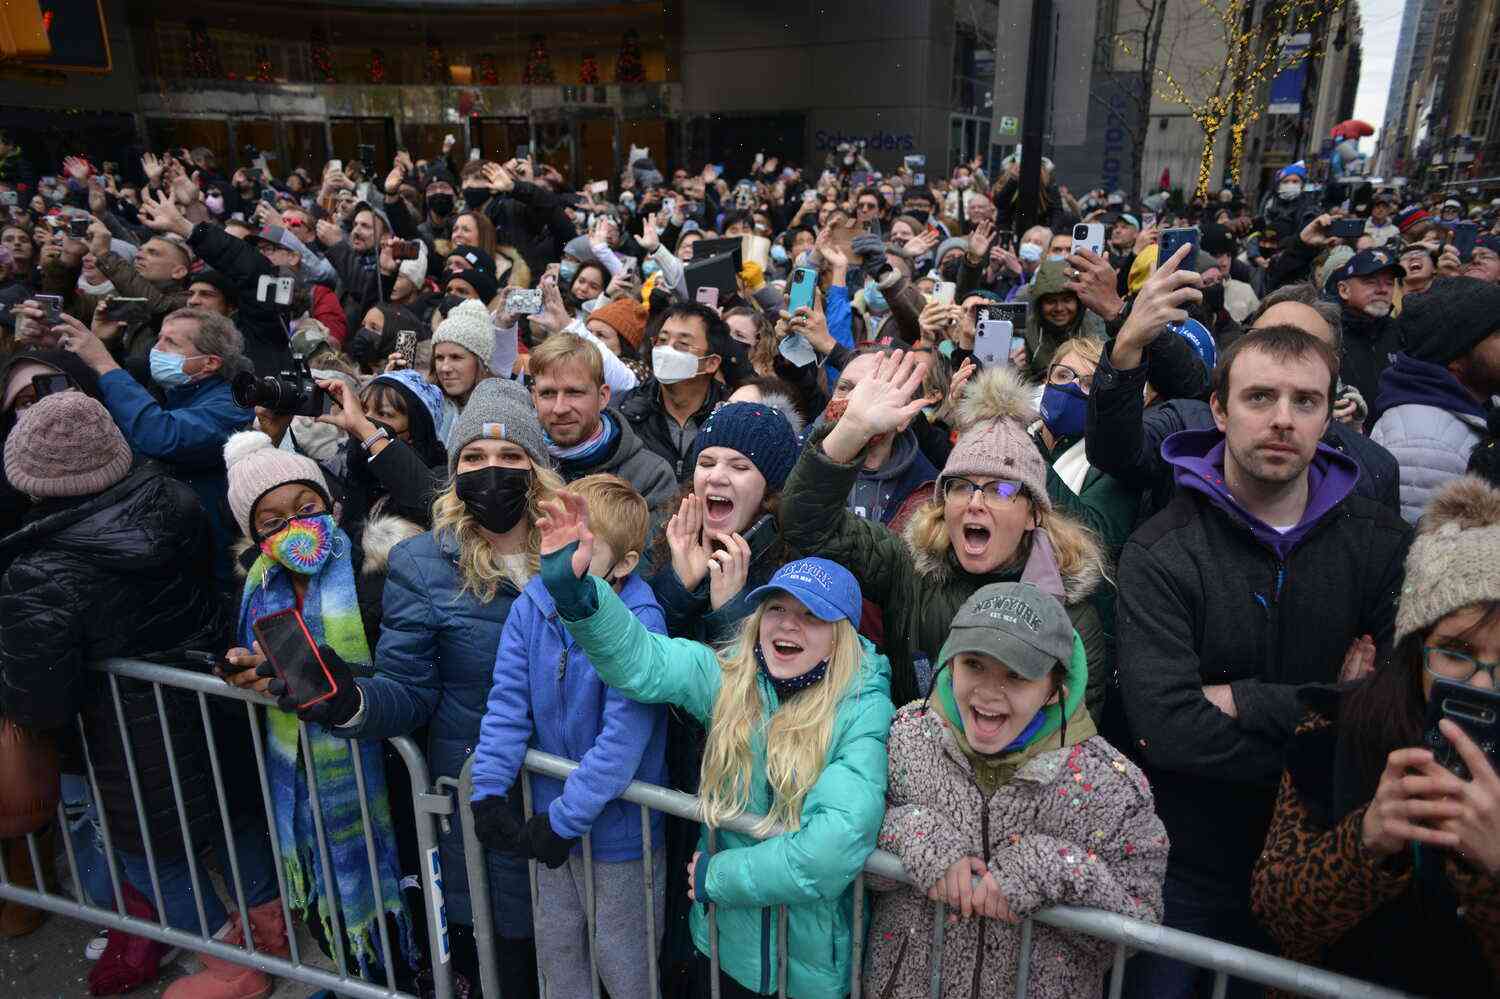 76th Macy's Thanksgiving Day Parade